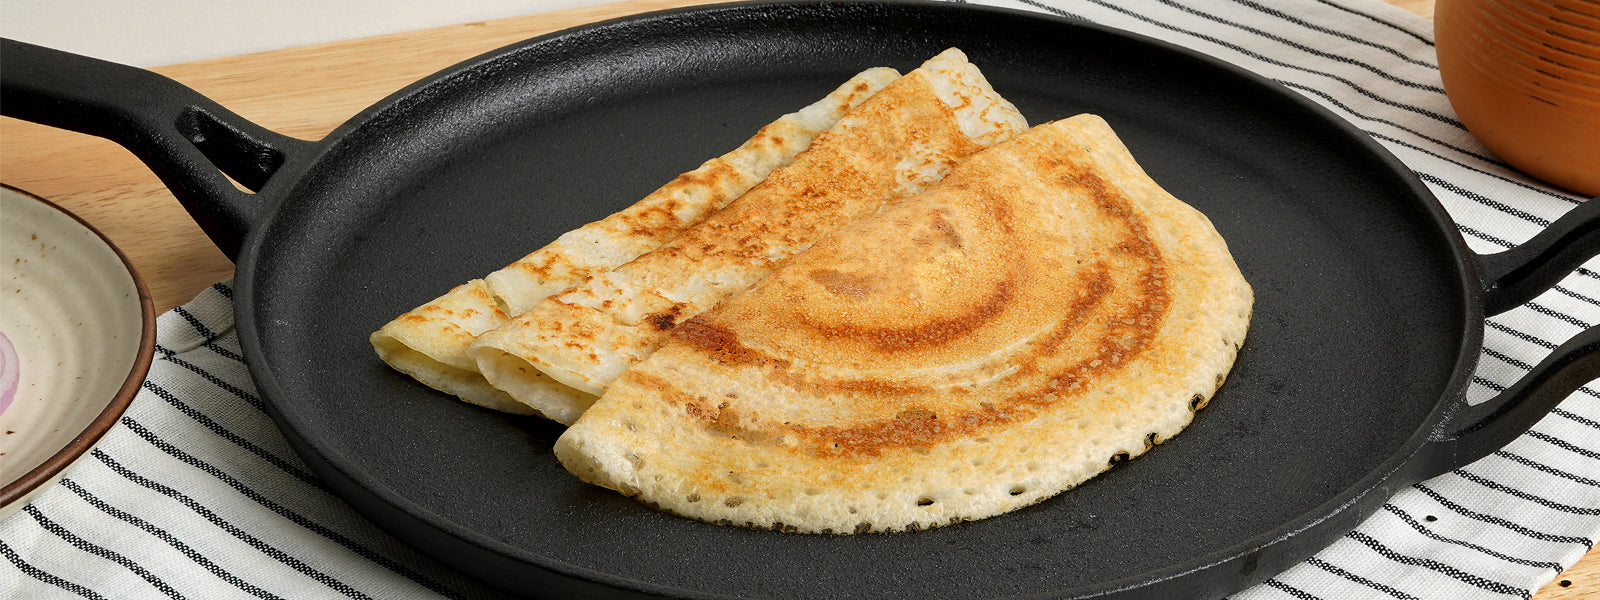 Big Dosa Tawa For Easy And Quick Cooking - PotsandPans India